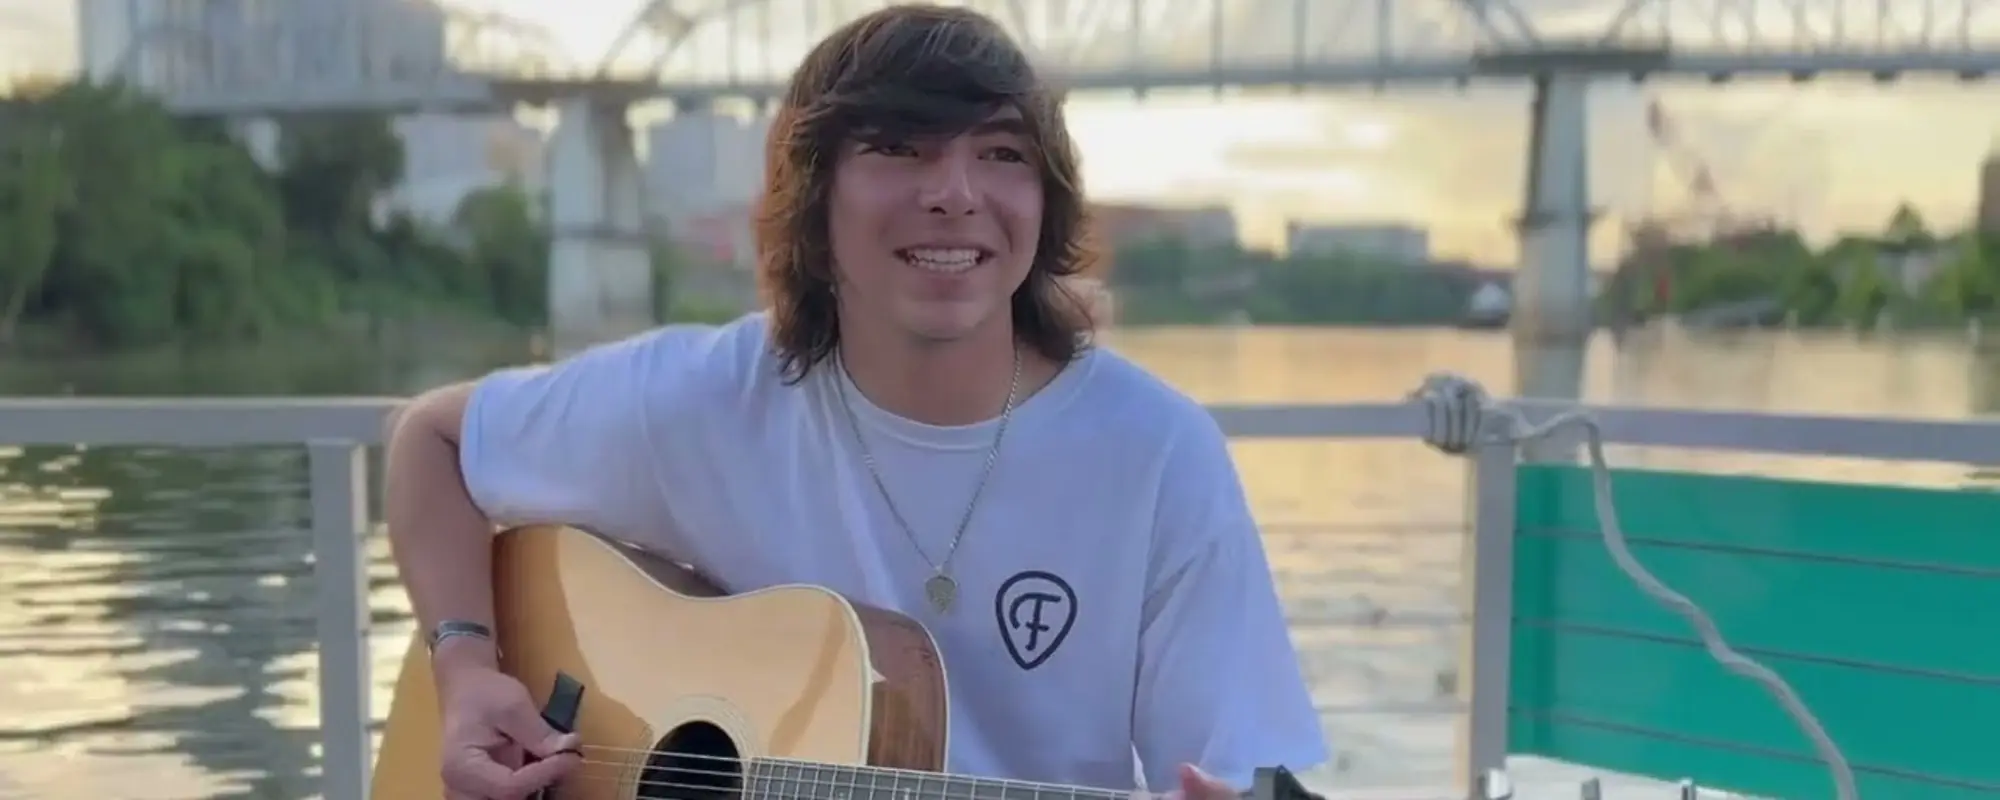 Wyatt Flores Releases a Touching Cover of The Fray’s “How to Save a Life”